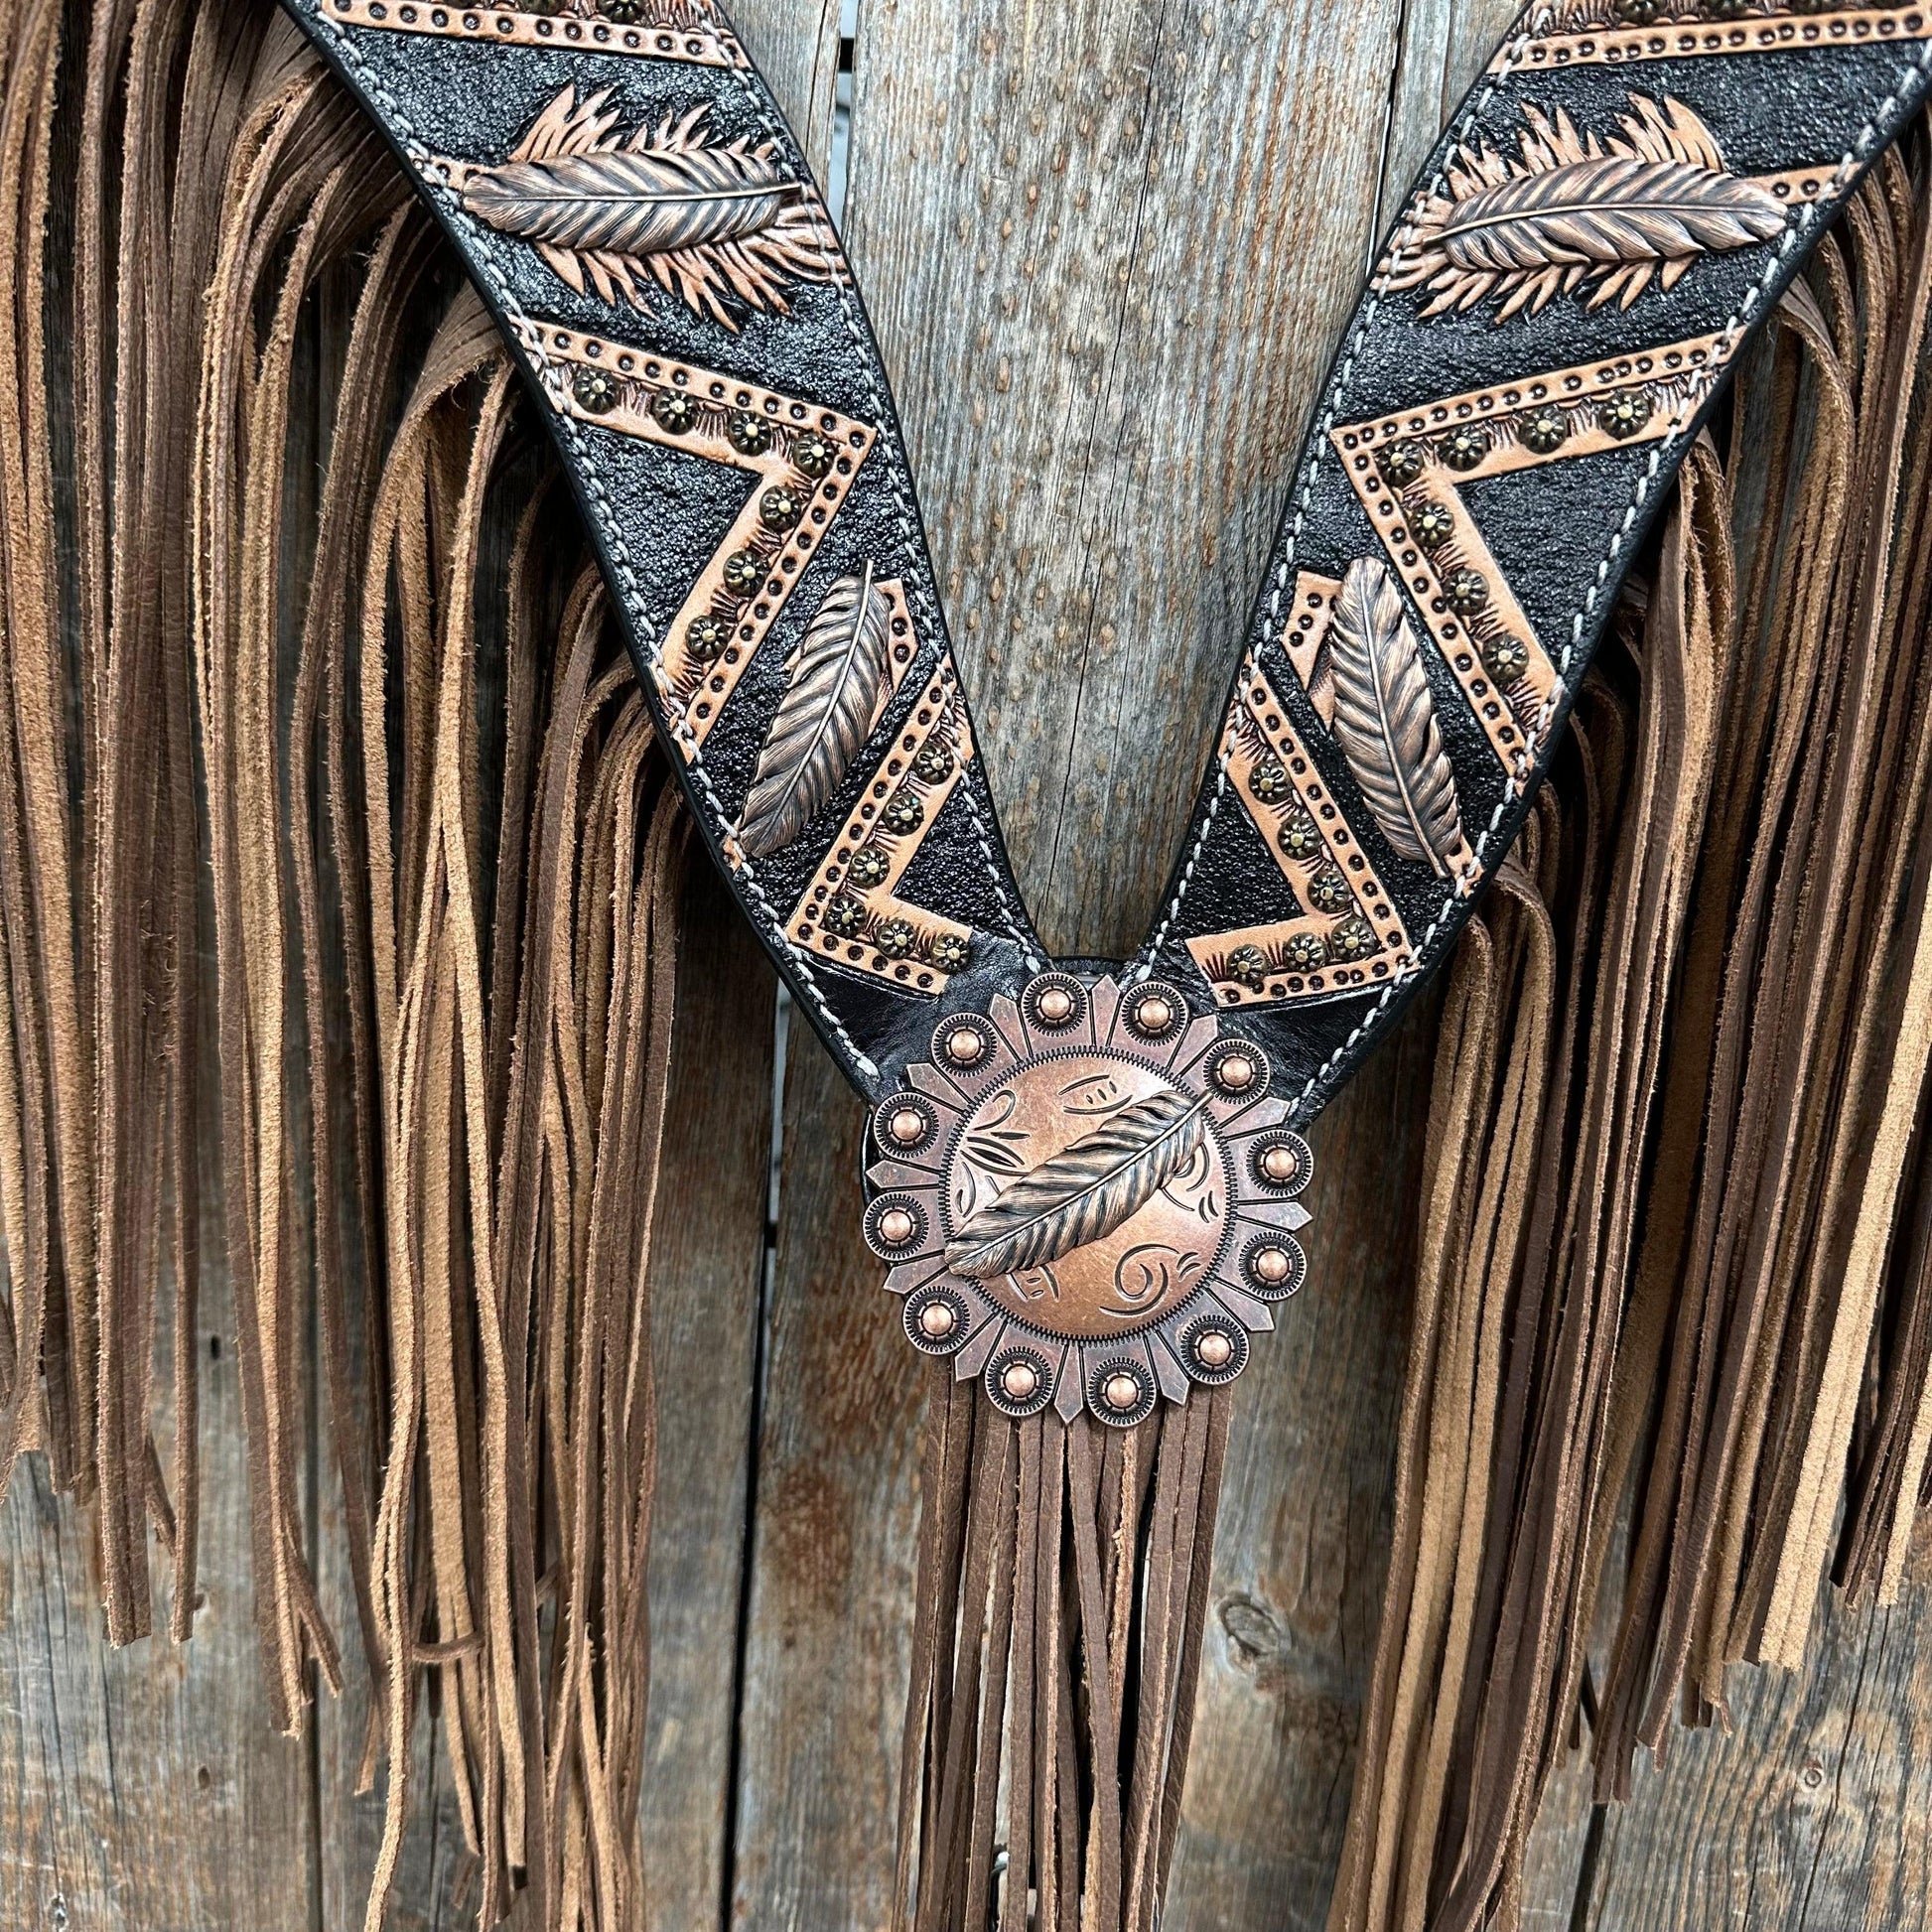 Feathered Arrow Fringed One Ear/ Breastcollar #OEBC553 - RODEO DRIVE